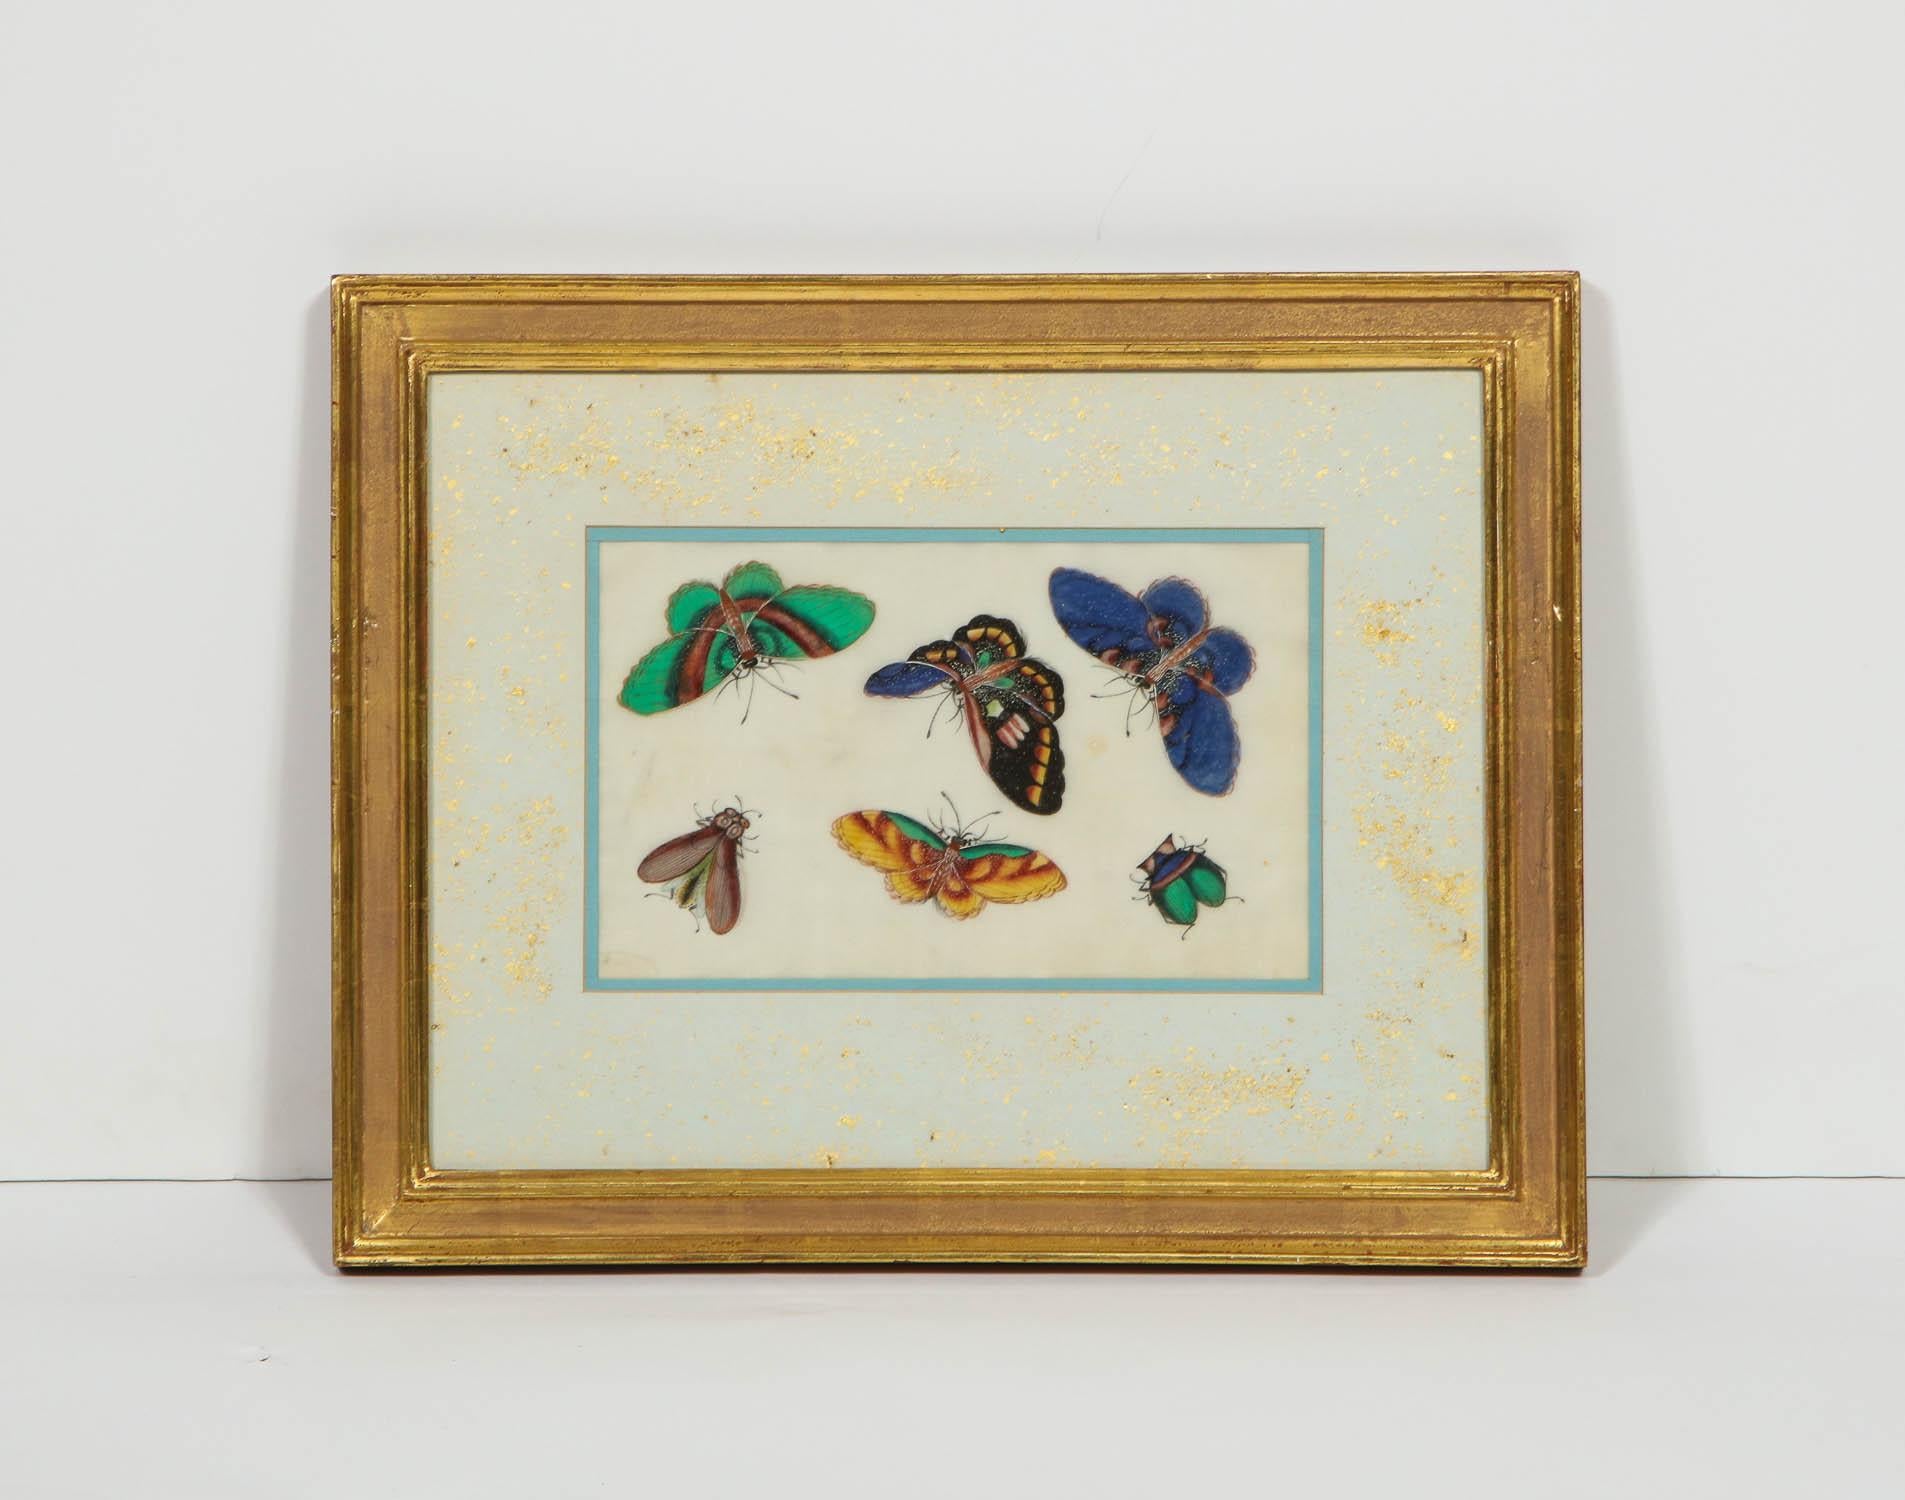 A set of eight Chinese rice paper paintings of butterflies and insects,
19th century, in giltwood frames.

Very fine quality.

Measures: 16